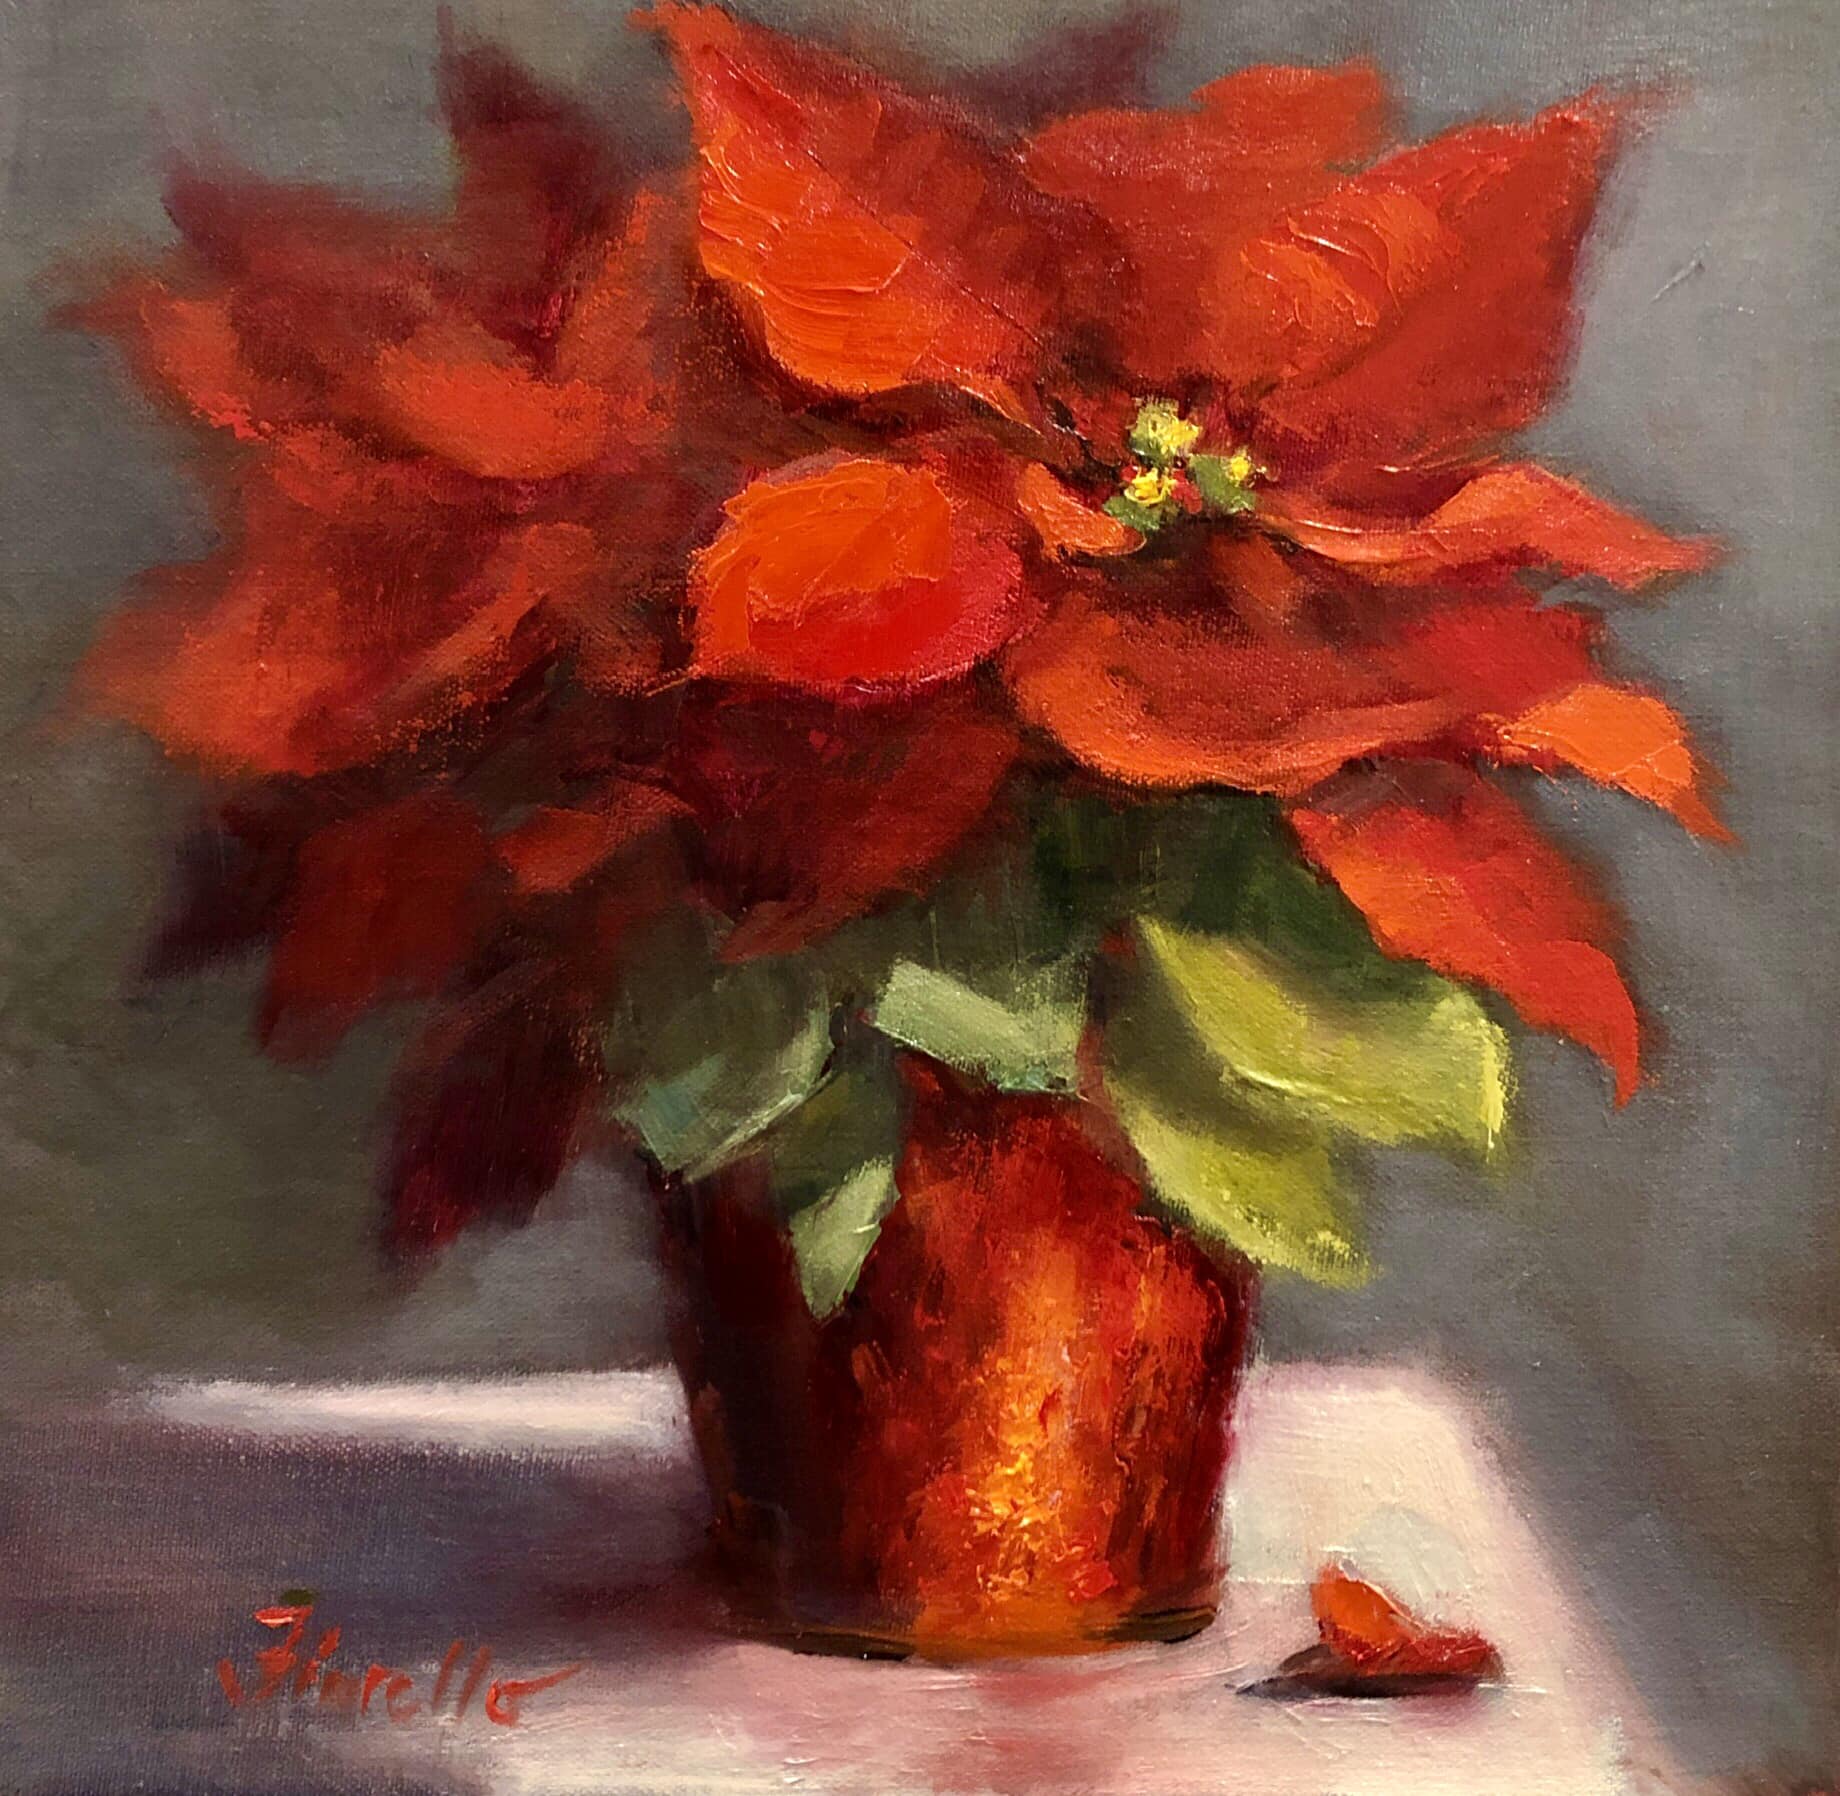 Painting of a poinsettia